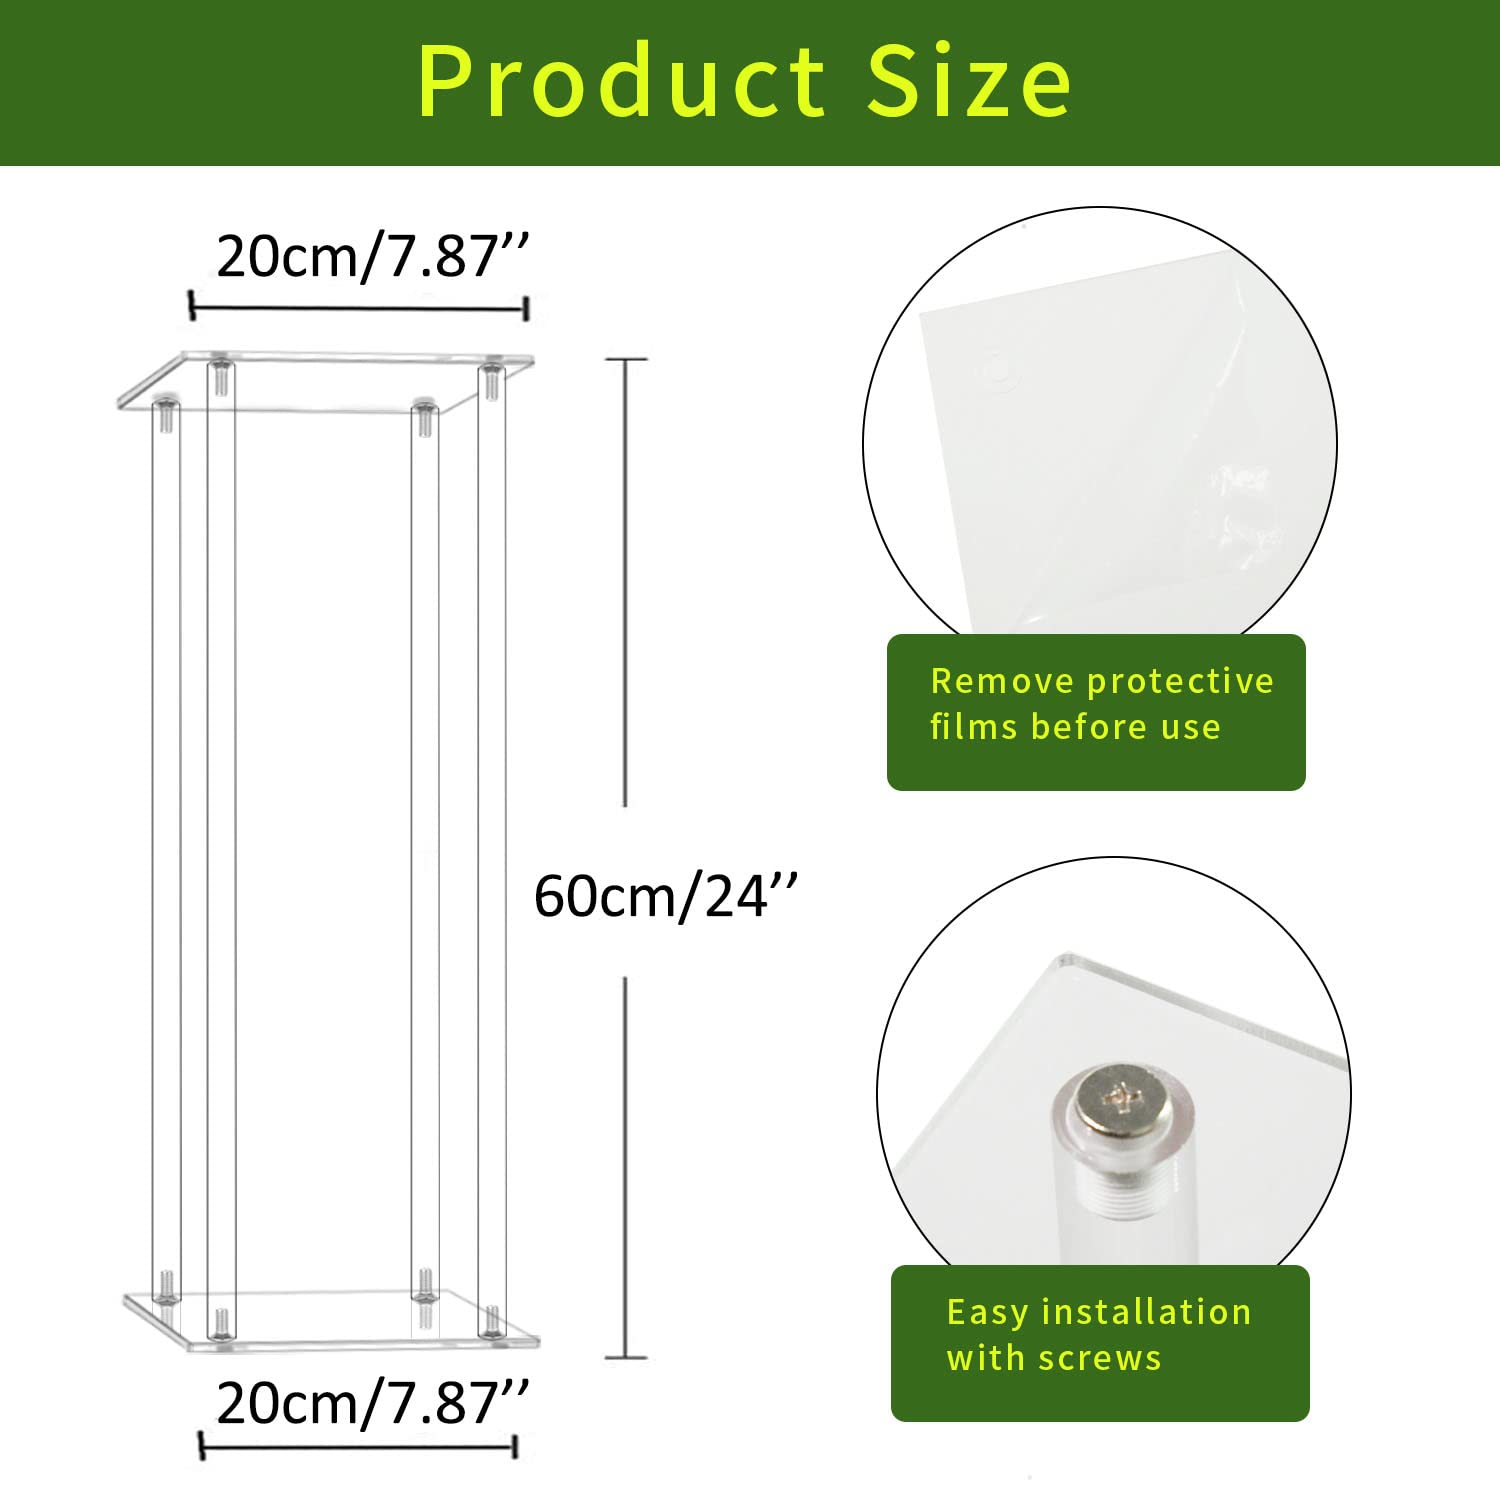 Simprefine 2 Pack 24'' Tall 8'' Dia. Acrylic Flower Stand Wedding Centerpieces Marriage Decorations Supplies Tabletop Decor Clear Display Rack Crystal Stage Pillar Party Props Floral Event Backdrops